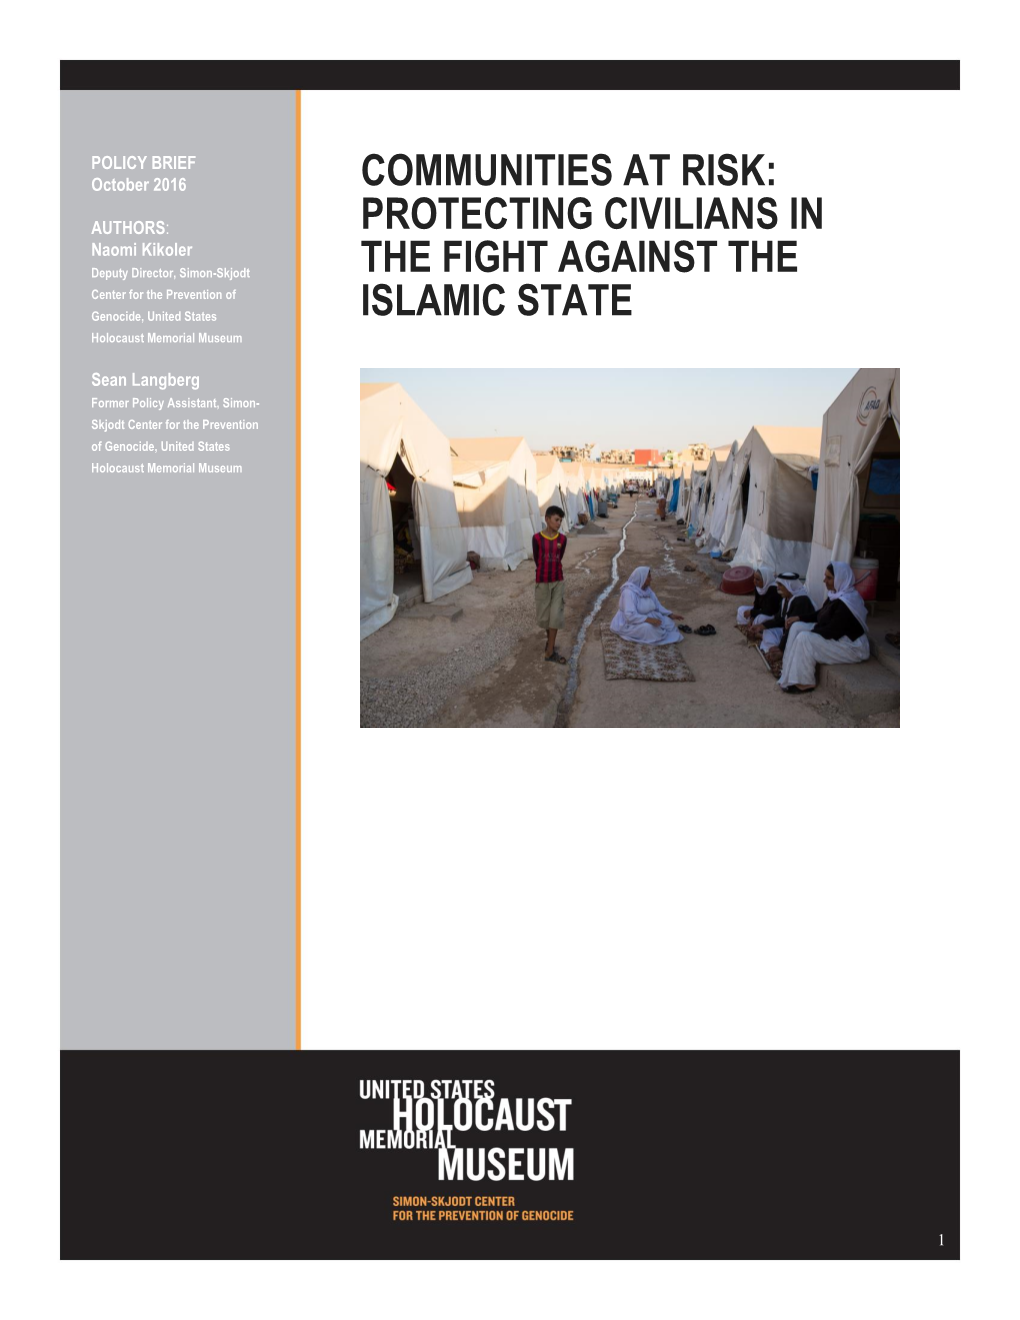 Communities at Risk: Protecting Civilians in the Fight Against the Islamic State